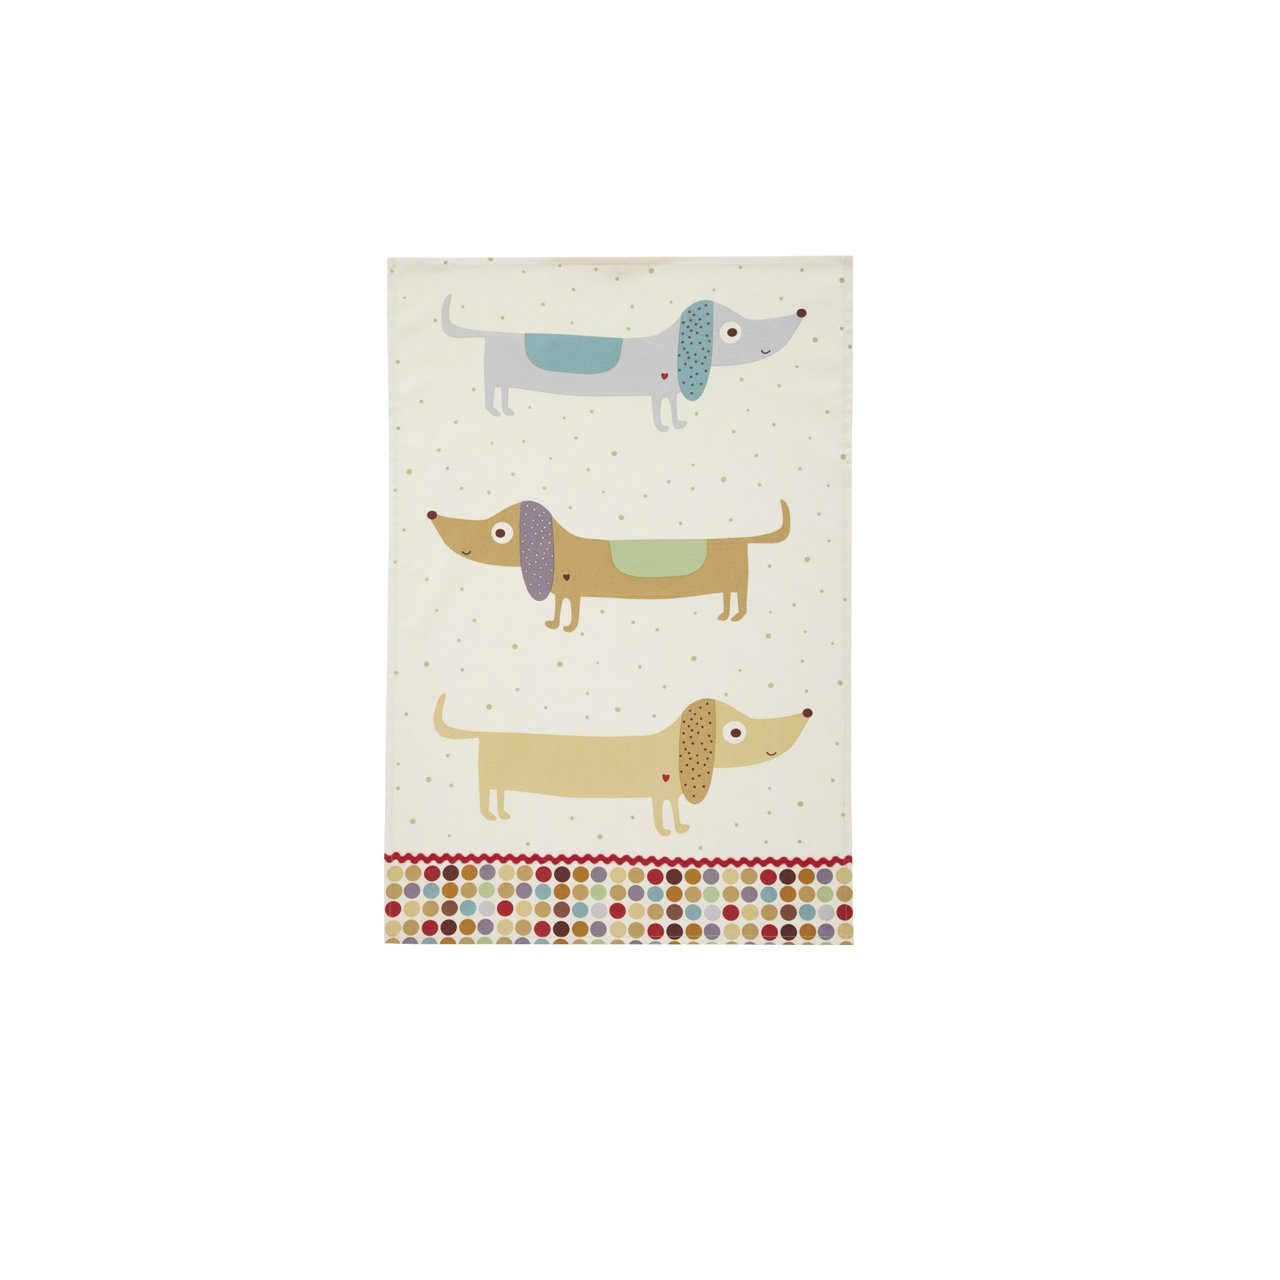 Ulster Weavers Hot Dog Tea Towel, 100% Cotton - with Fun, Restro Sausage Dog Hand Drawn Design - Kitchen and Cooking Gifts for Bakers & Chefs - Homeware & Kitchenware Range